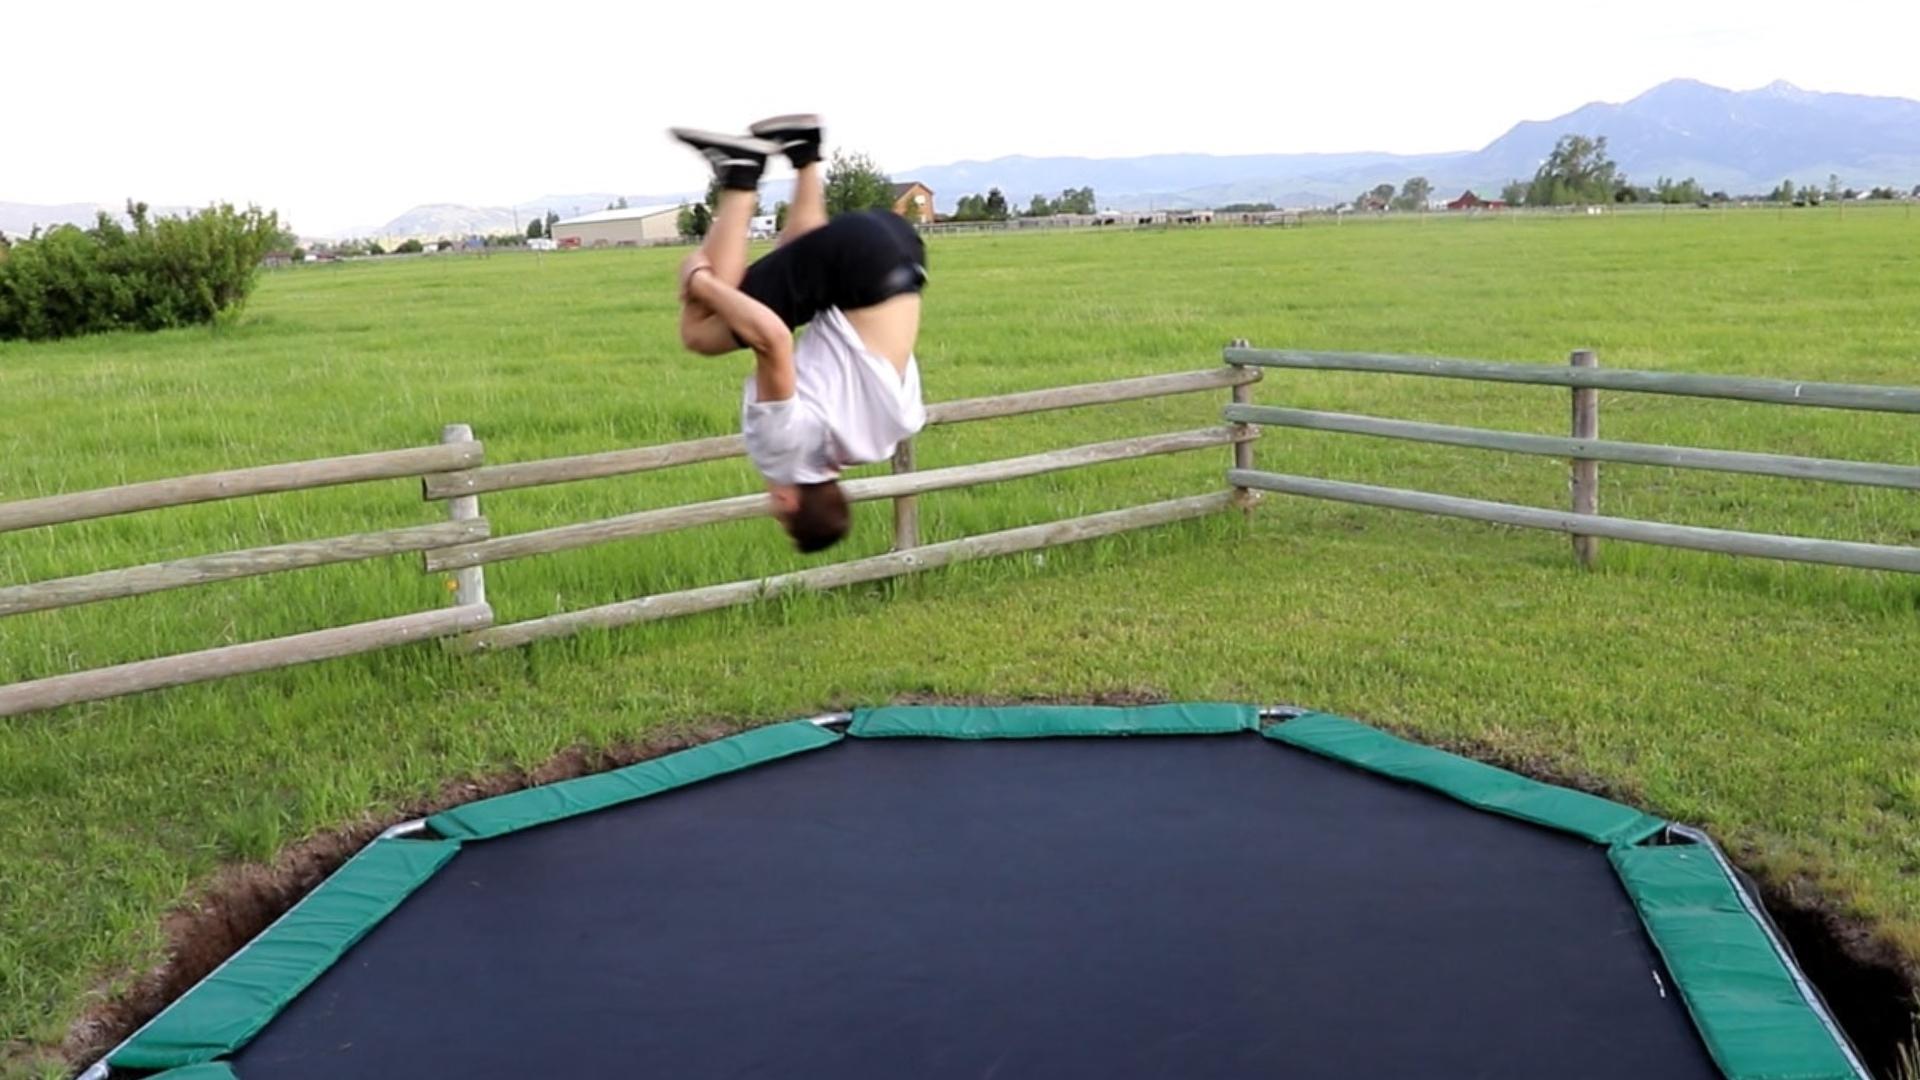 How Do You Do a Flip on a Trampoline For Beginners